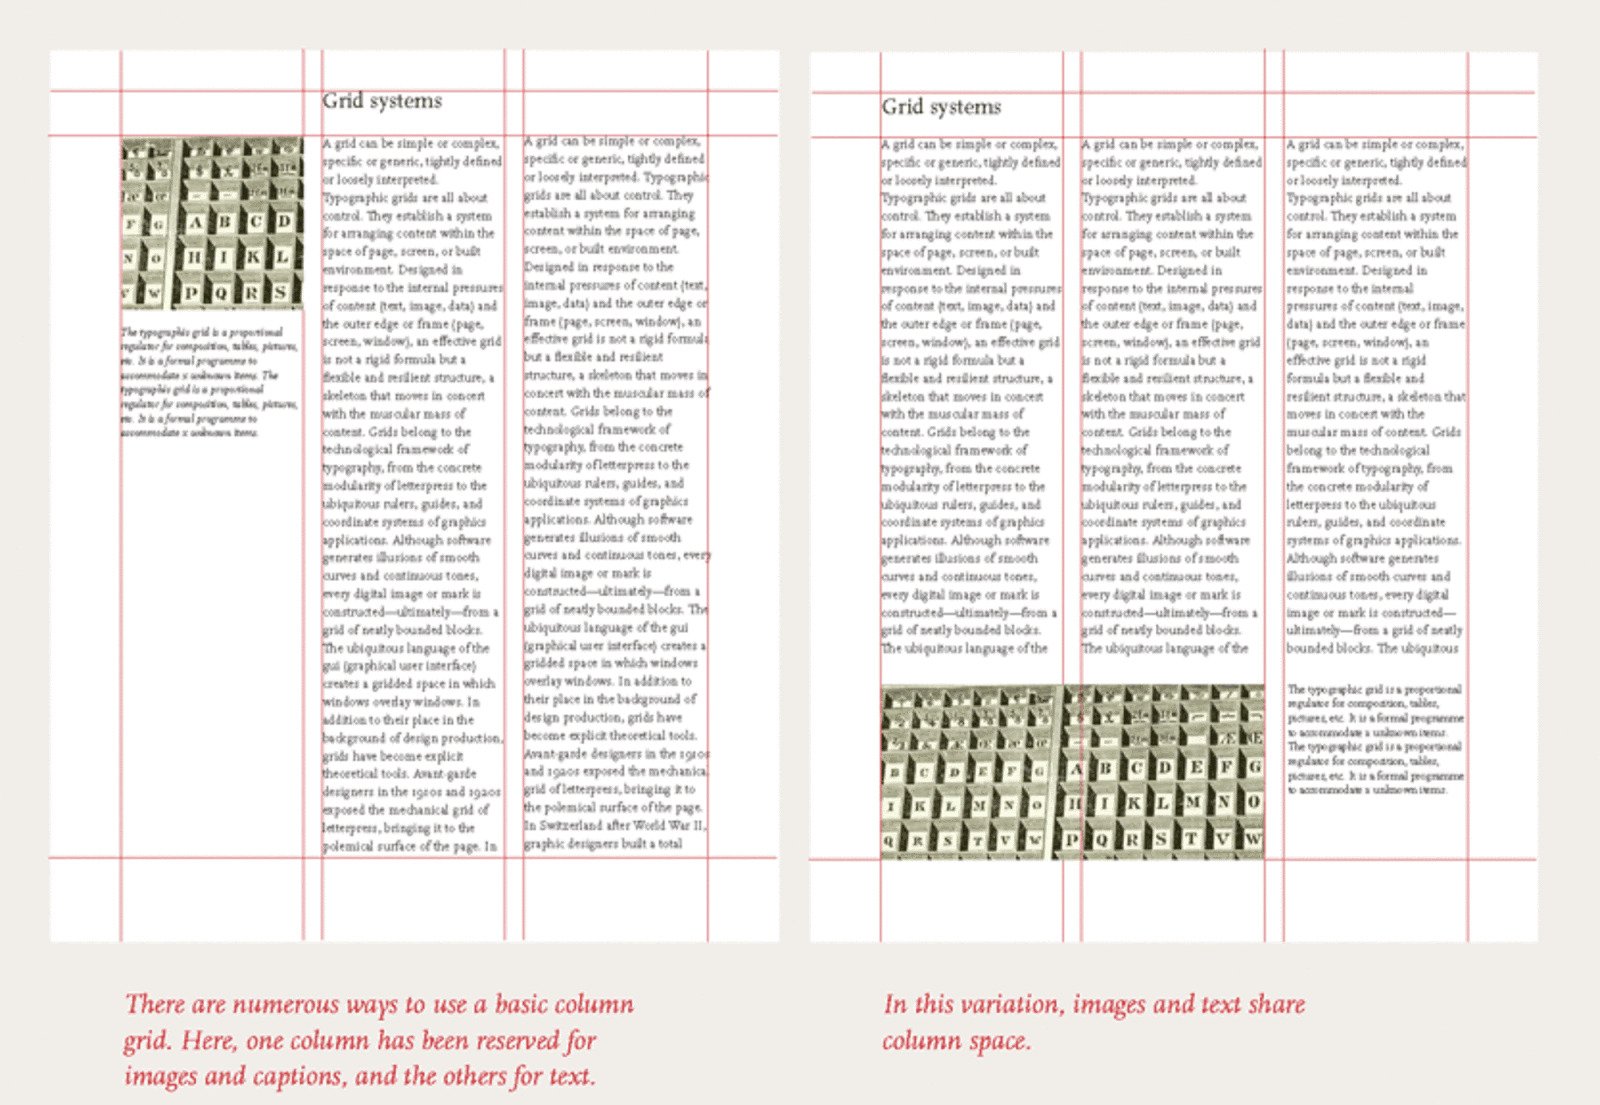 In this multi-column grid example on the left, one column is reserved for images and captions.